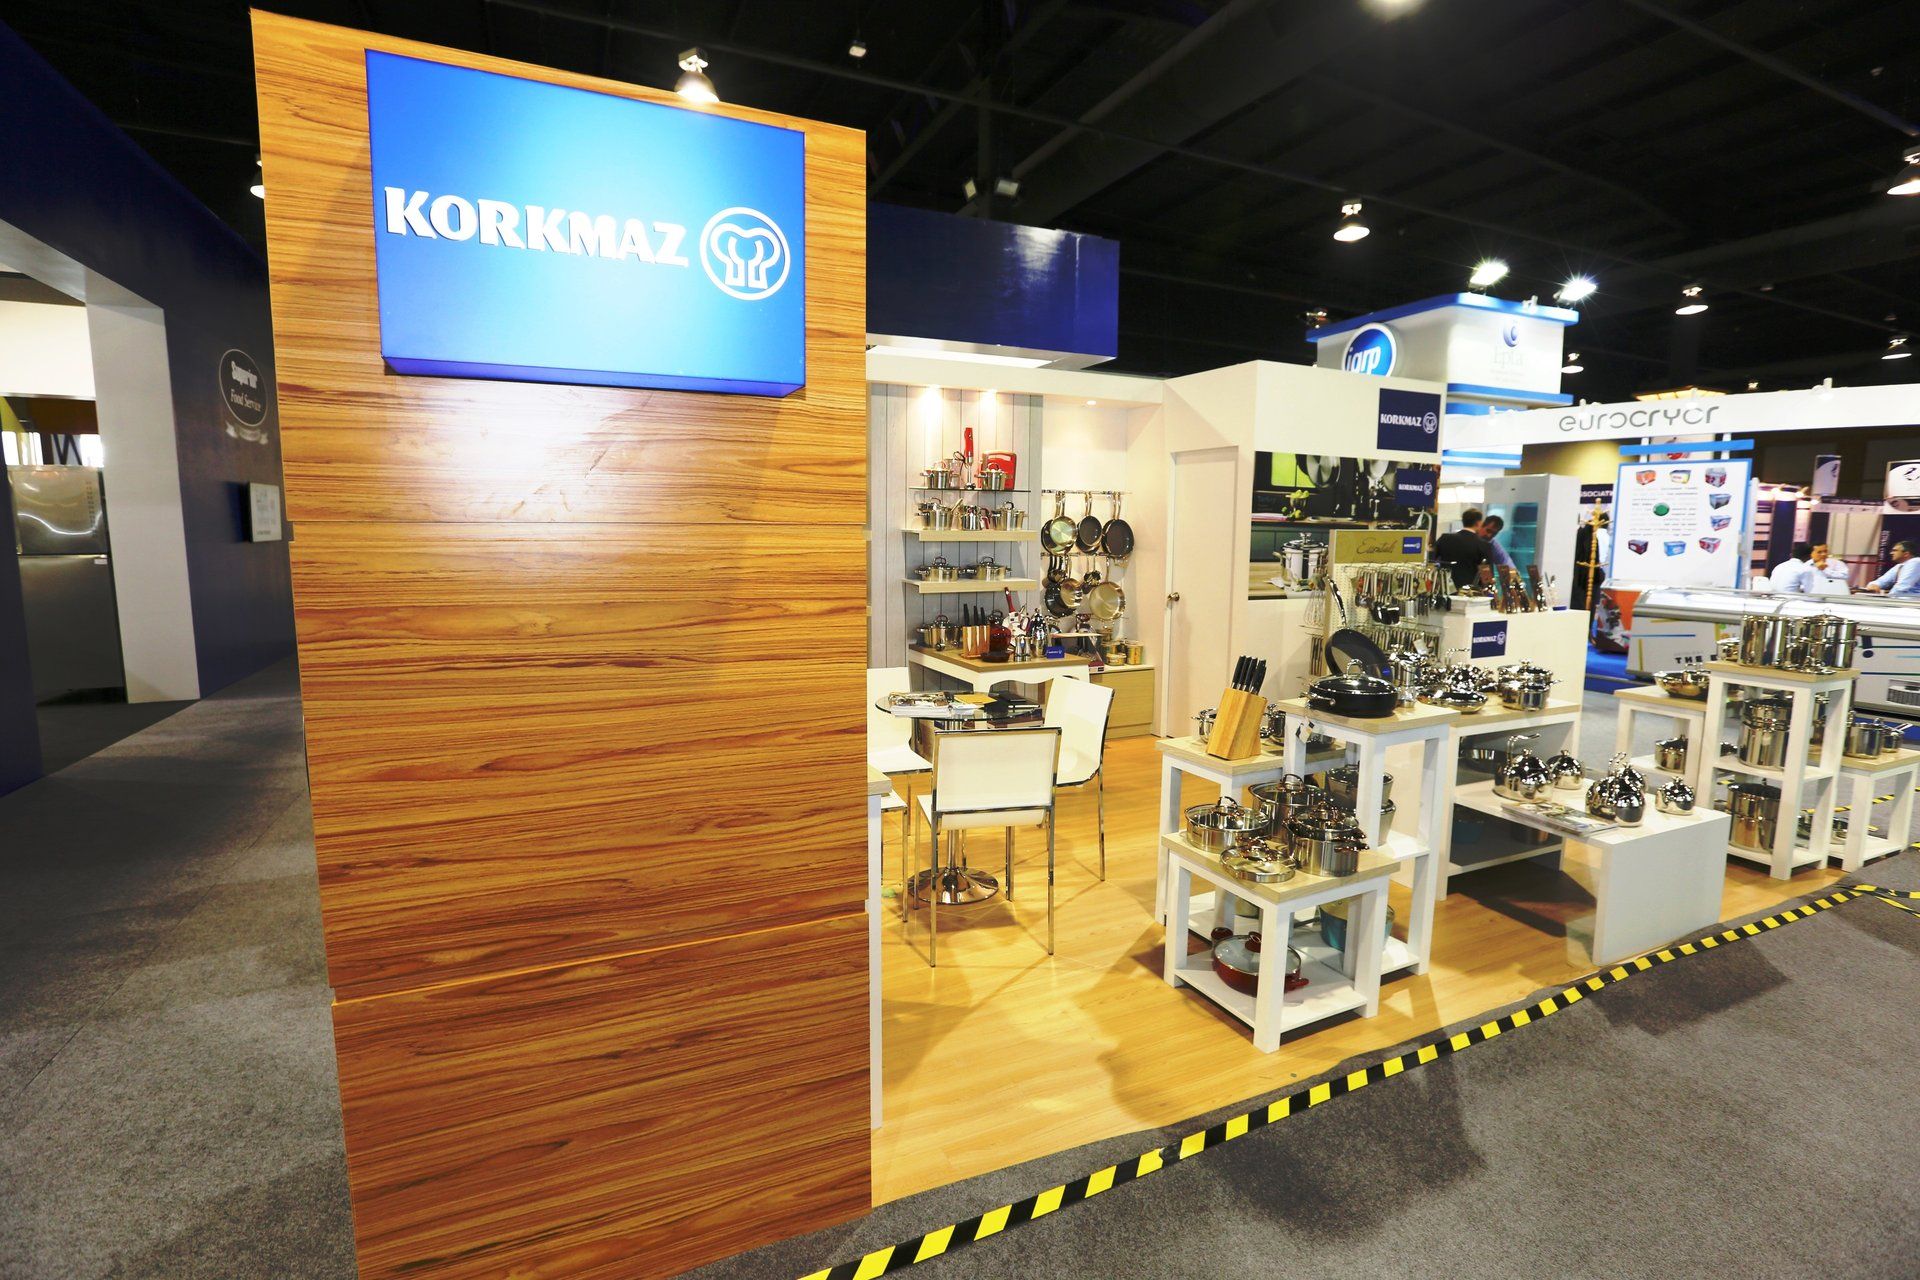 Korkmaz @ Thaifex 2015. Booth designed and built by Essential Global Fairs.